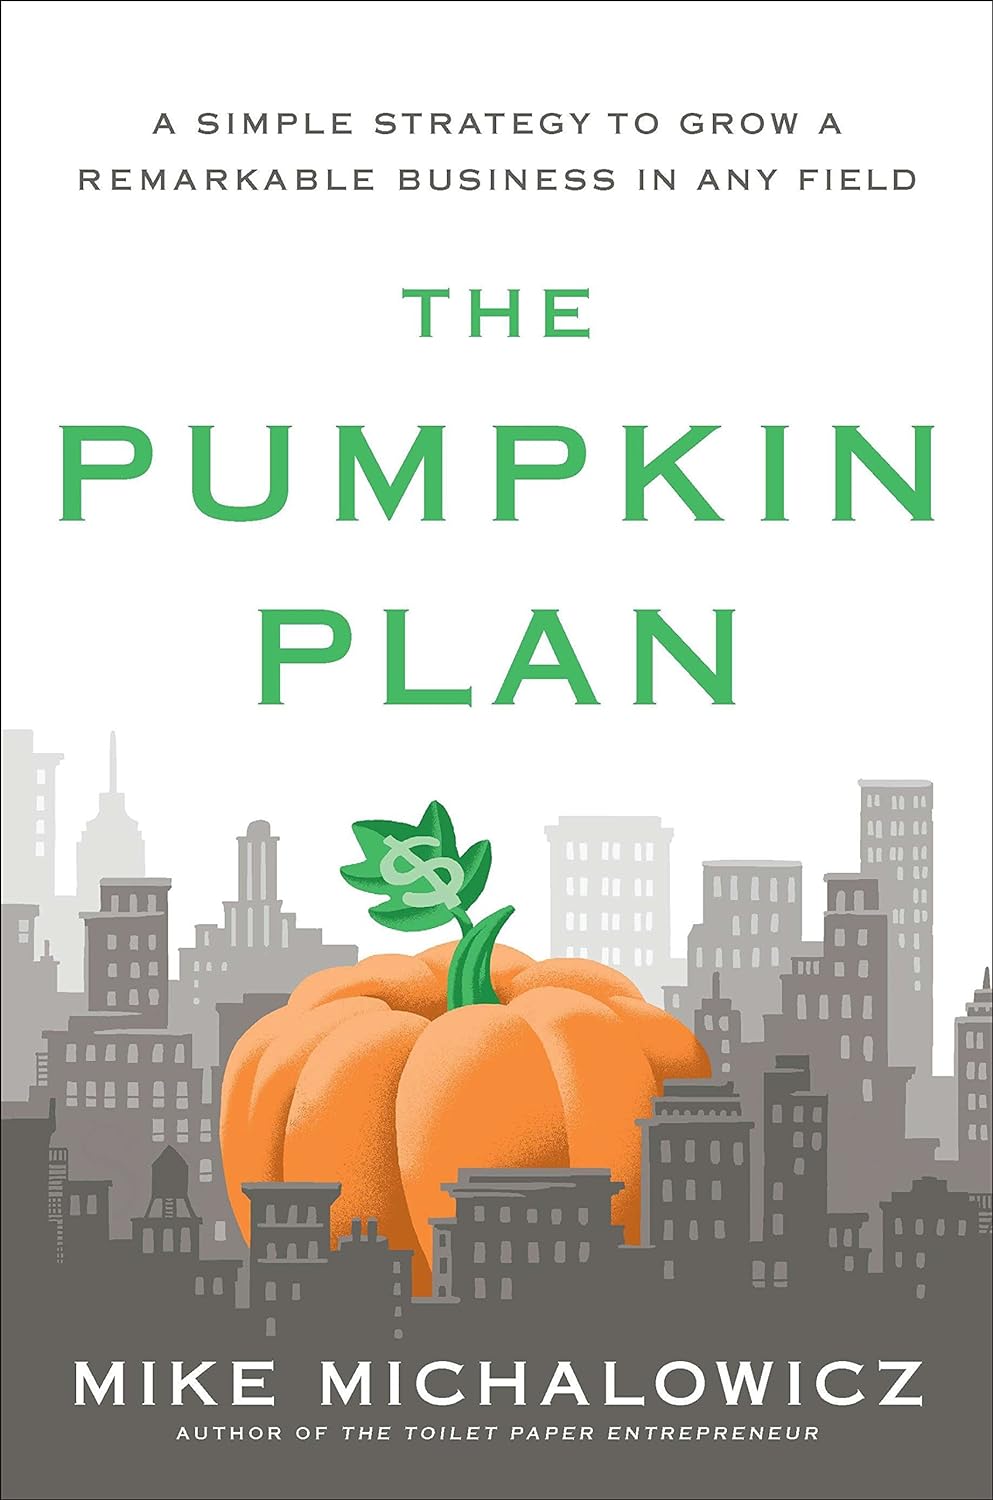 Mike Michalowicz - The Pumpkin Plan. A Simple Strategy to Grow a Remarkable Business in Any Field